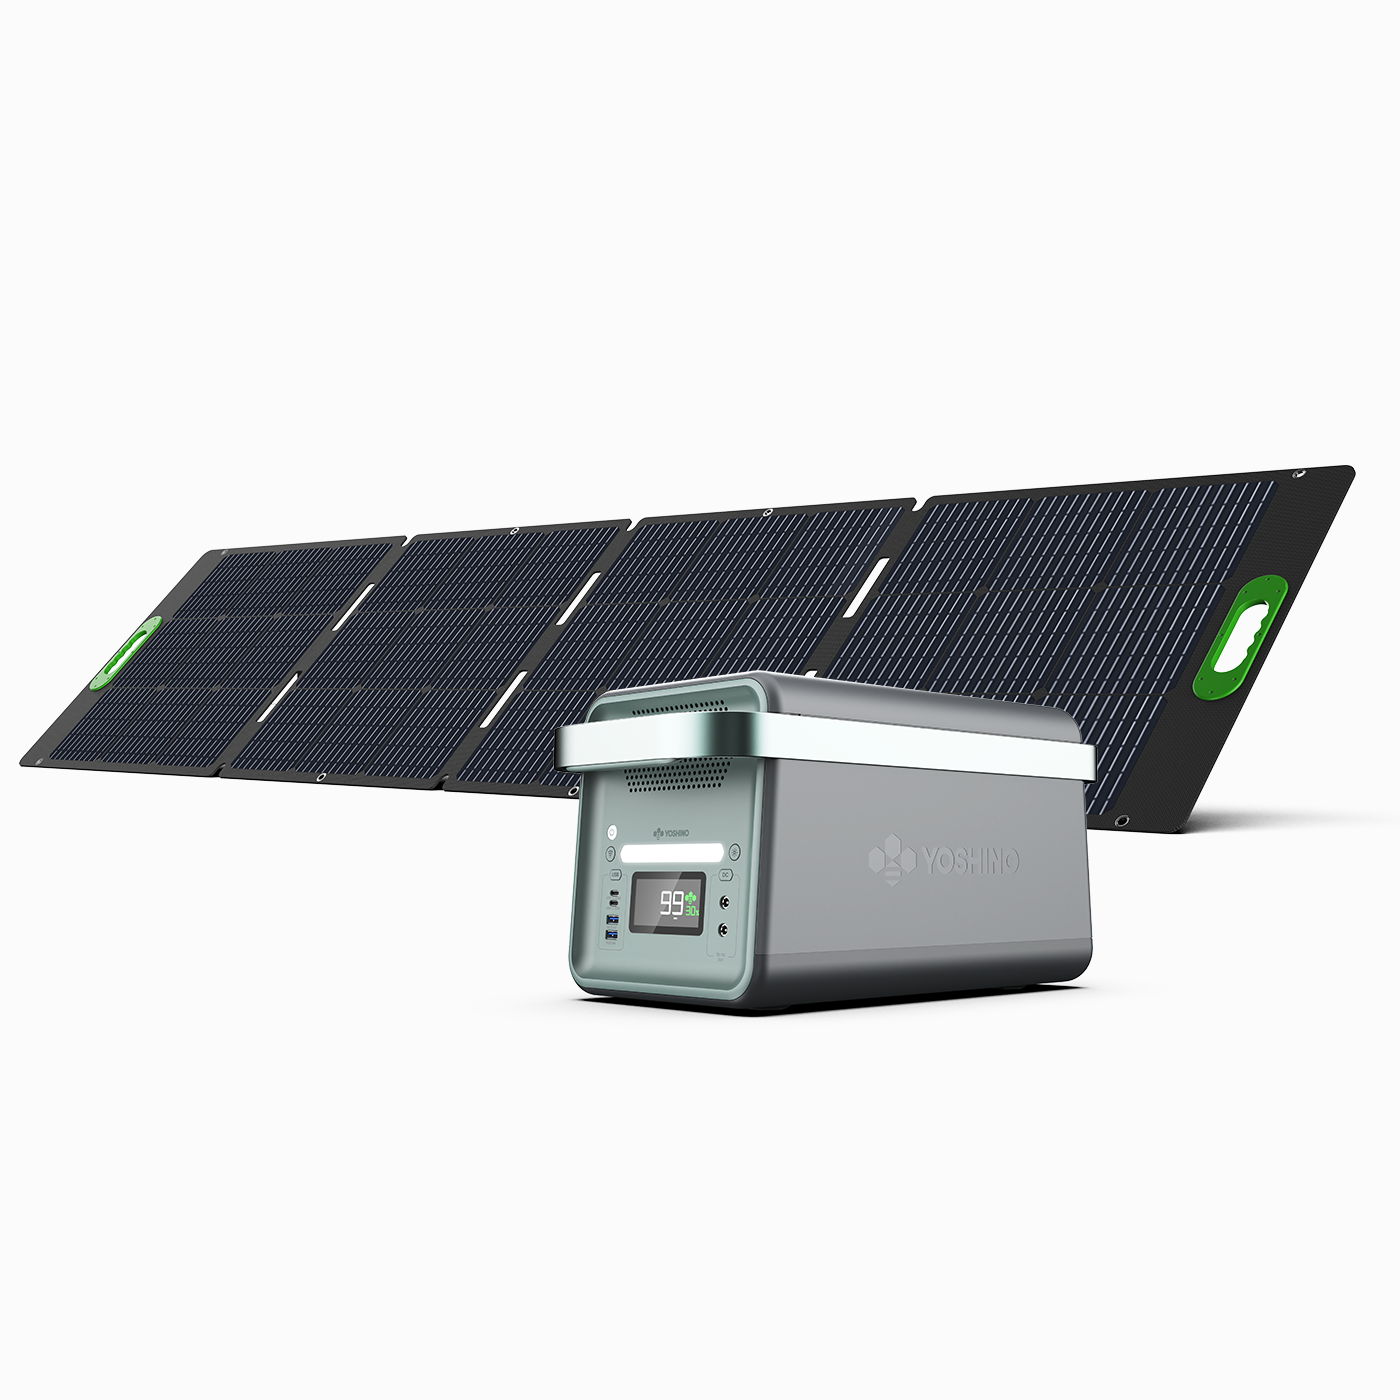 Yoshino Power K20SP21 Solid State Portable Solar Generator - Angled View